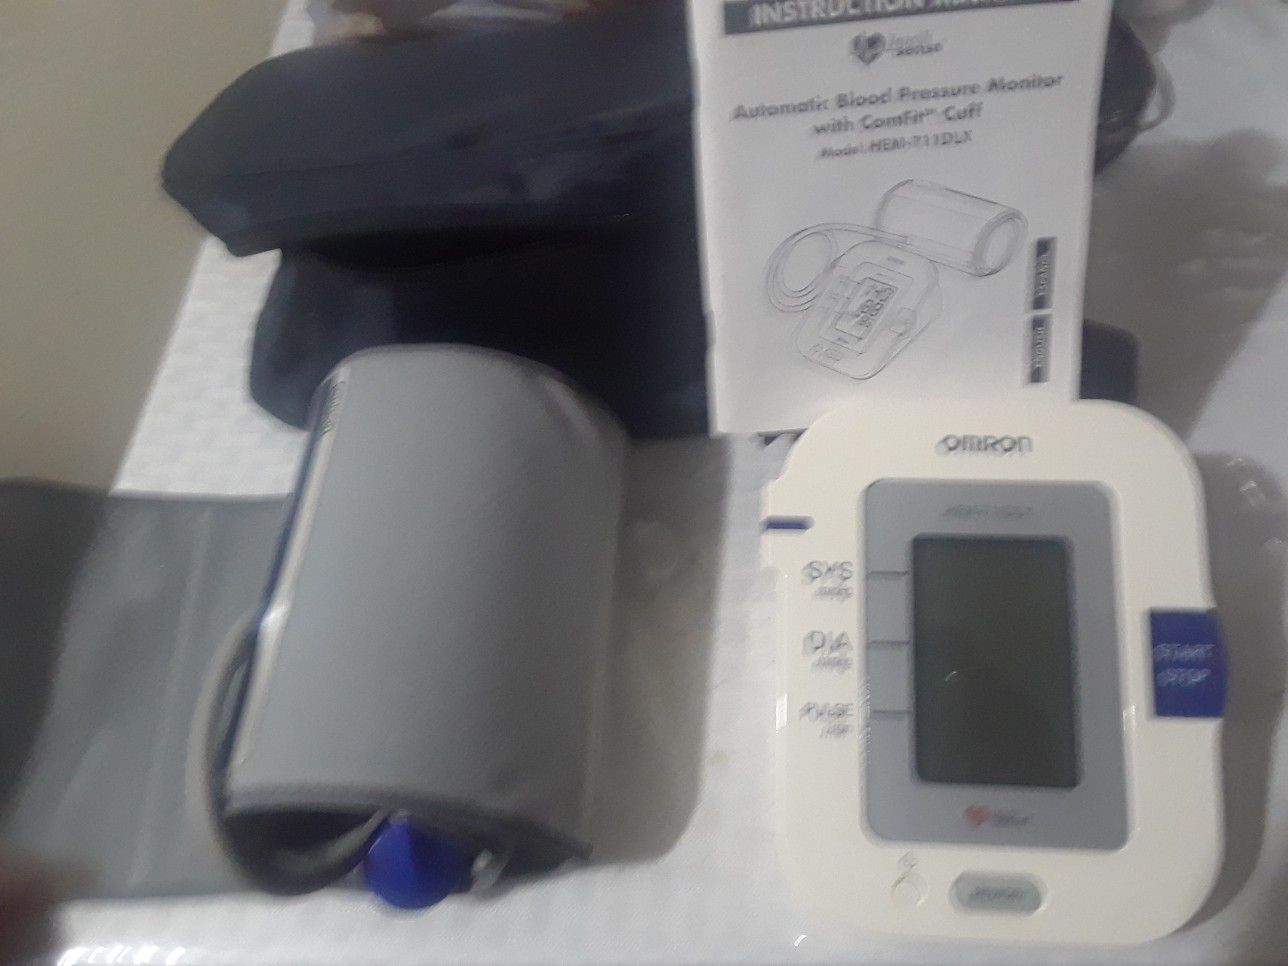 Cordless Blood pressure monitor $30.00 Cash only